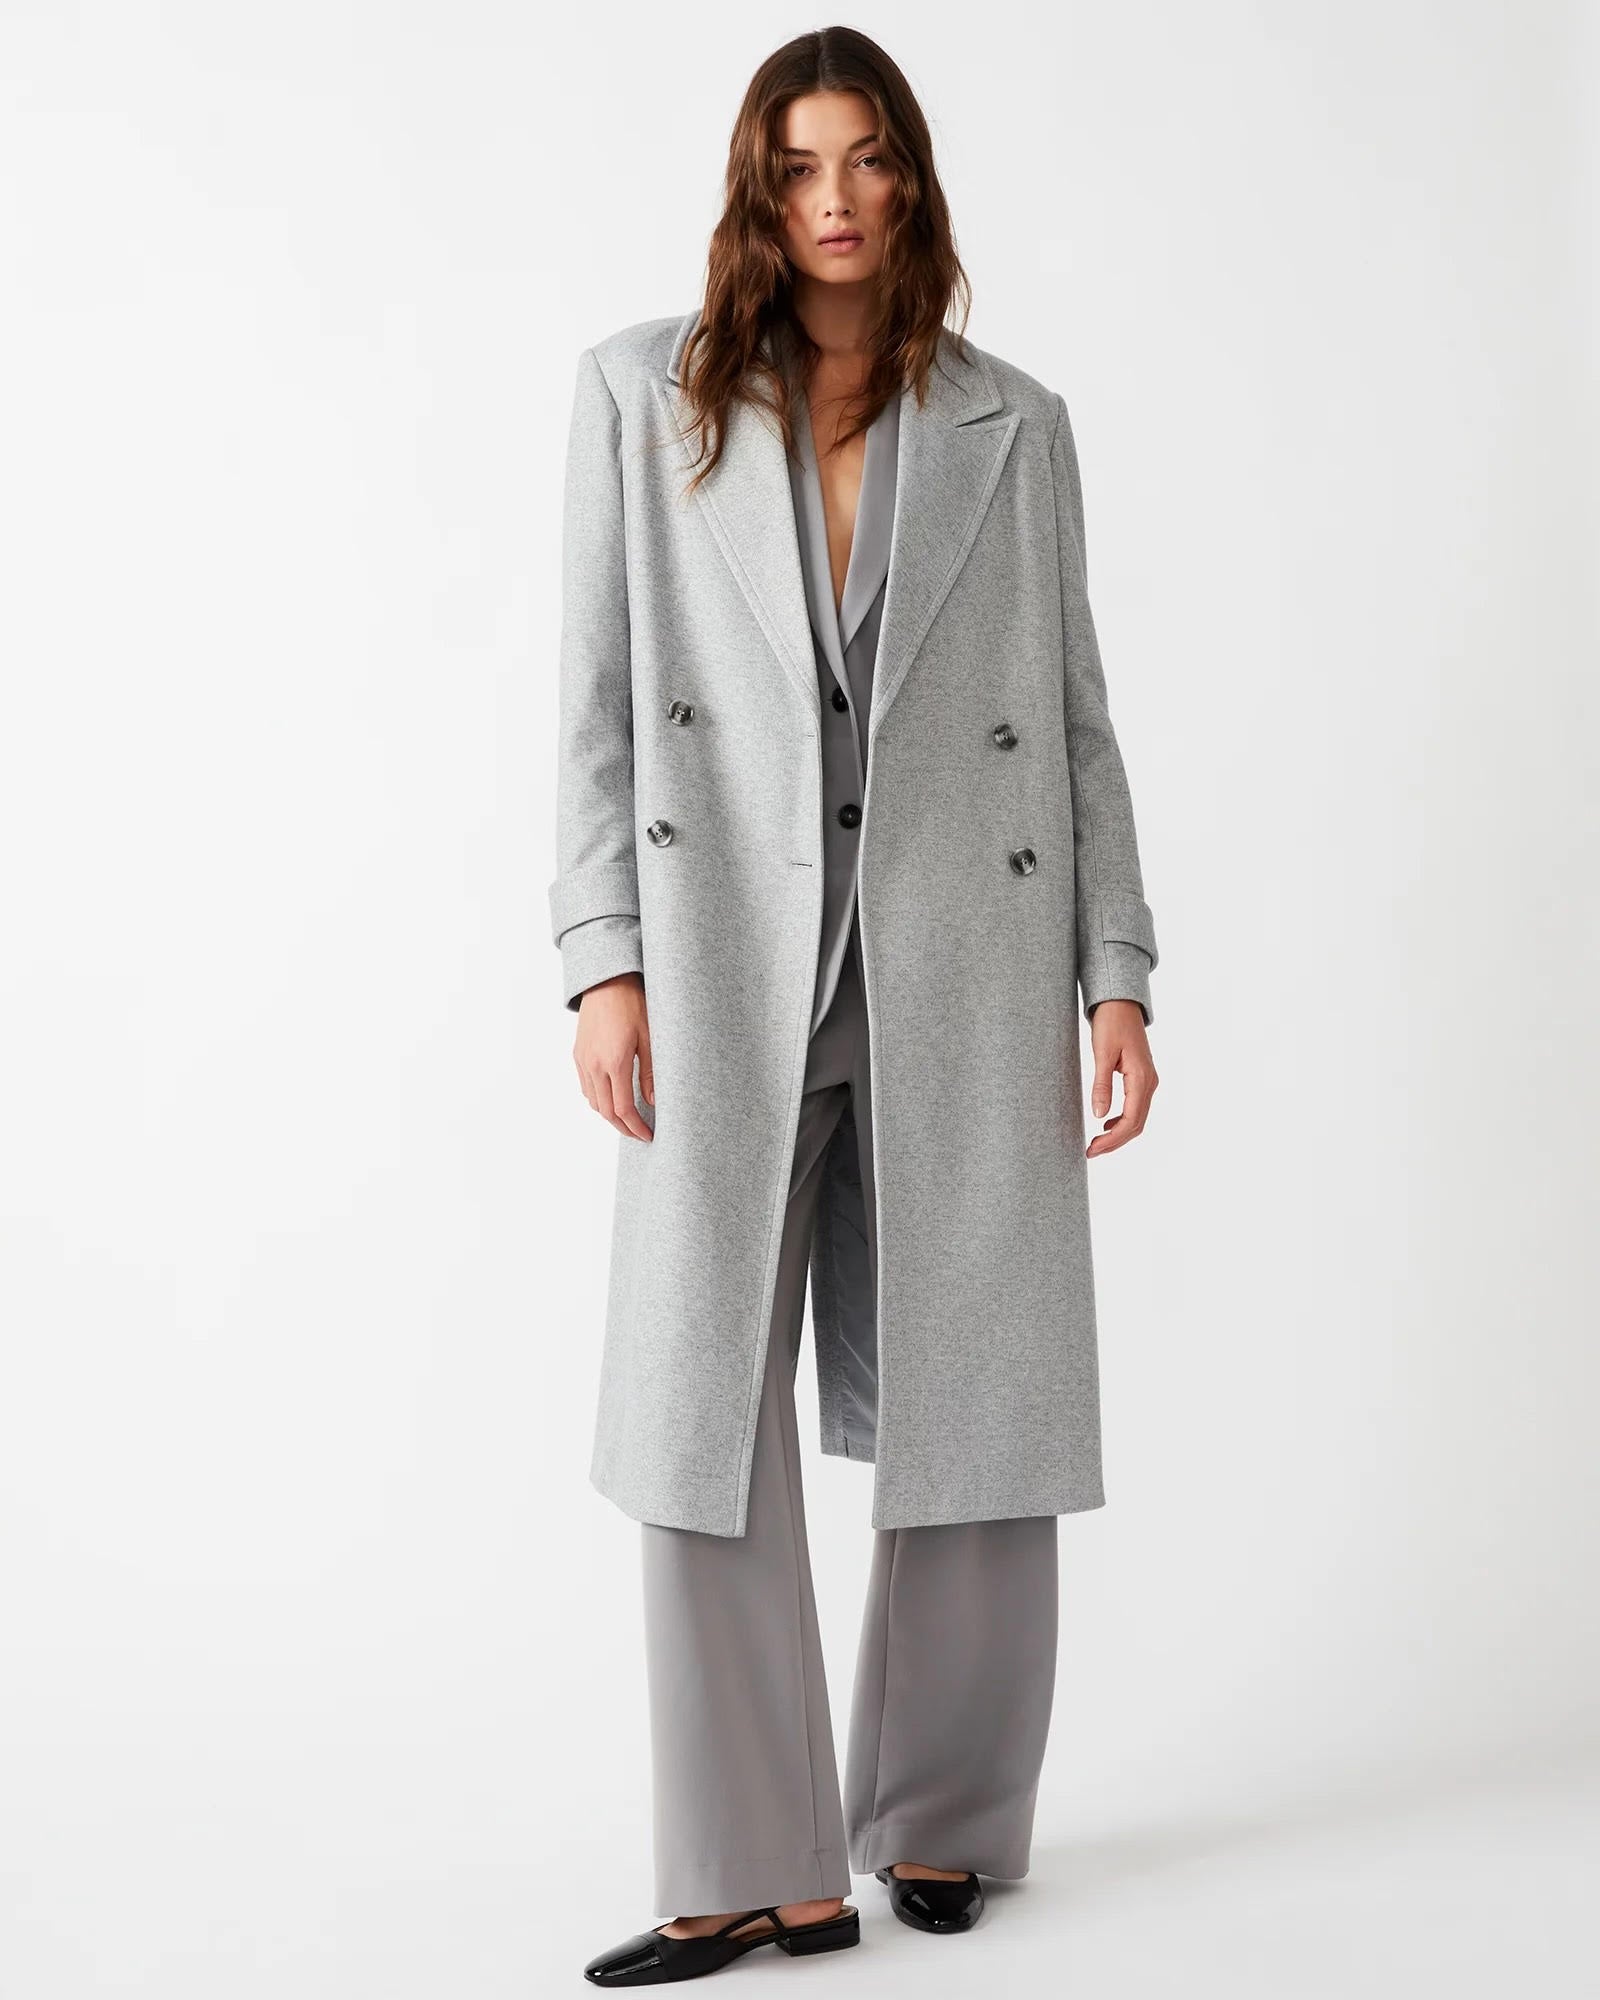 Light Gray Trench Coat - Final Sale